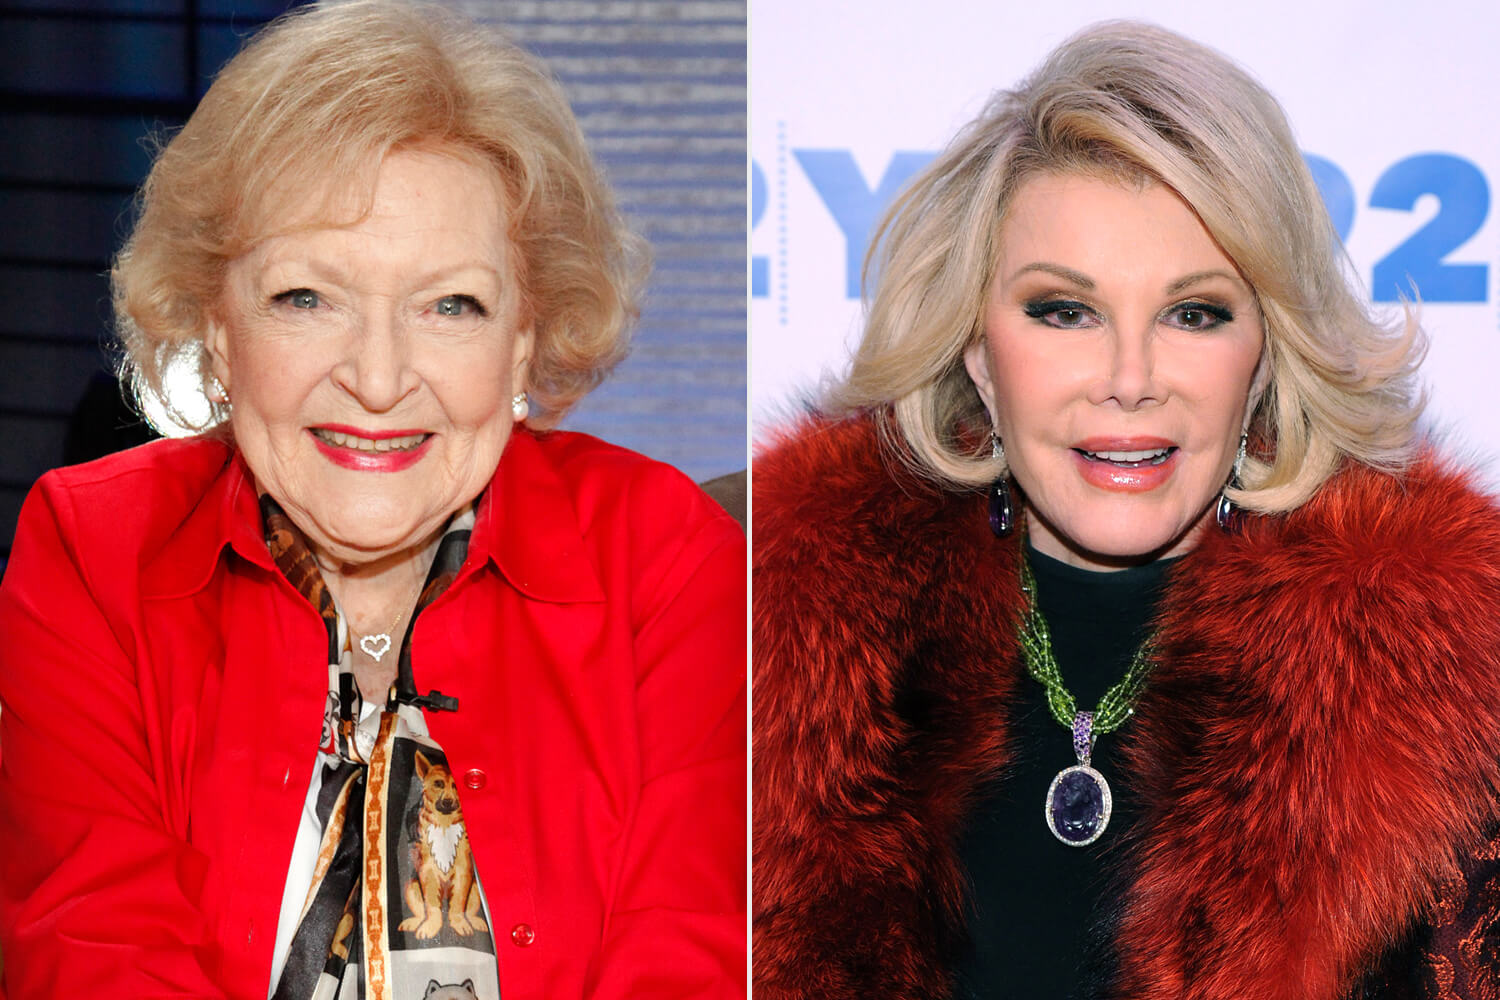 Betty White Joan Rivers Interview (January 2022) Know The Complete Details!